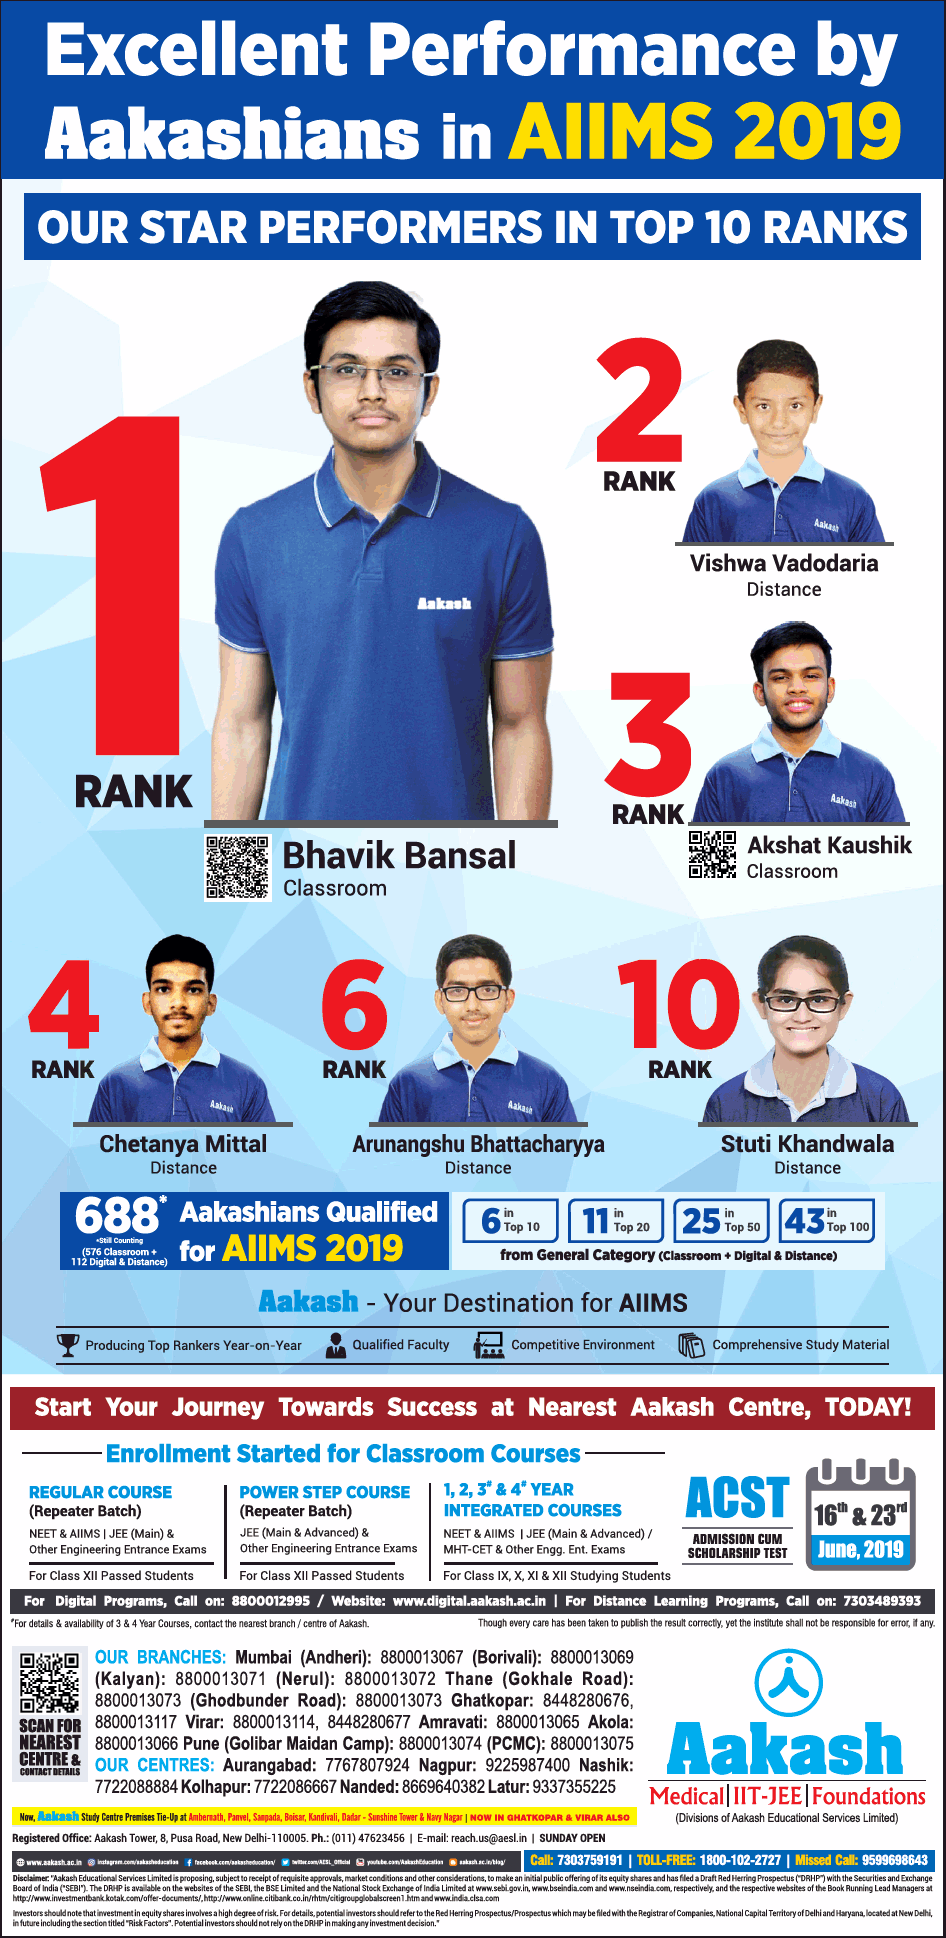 aakash-medical-iit-jee-foundation-excellent-performance-by-aakashians-in-aiims-2019-ad-times-of-india-mumbai-16-06-2019.png